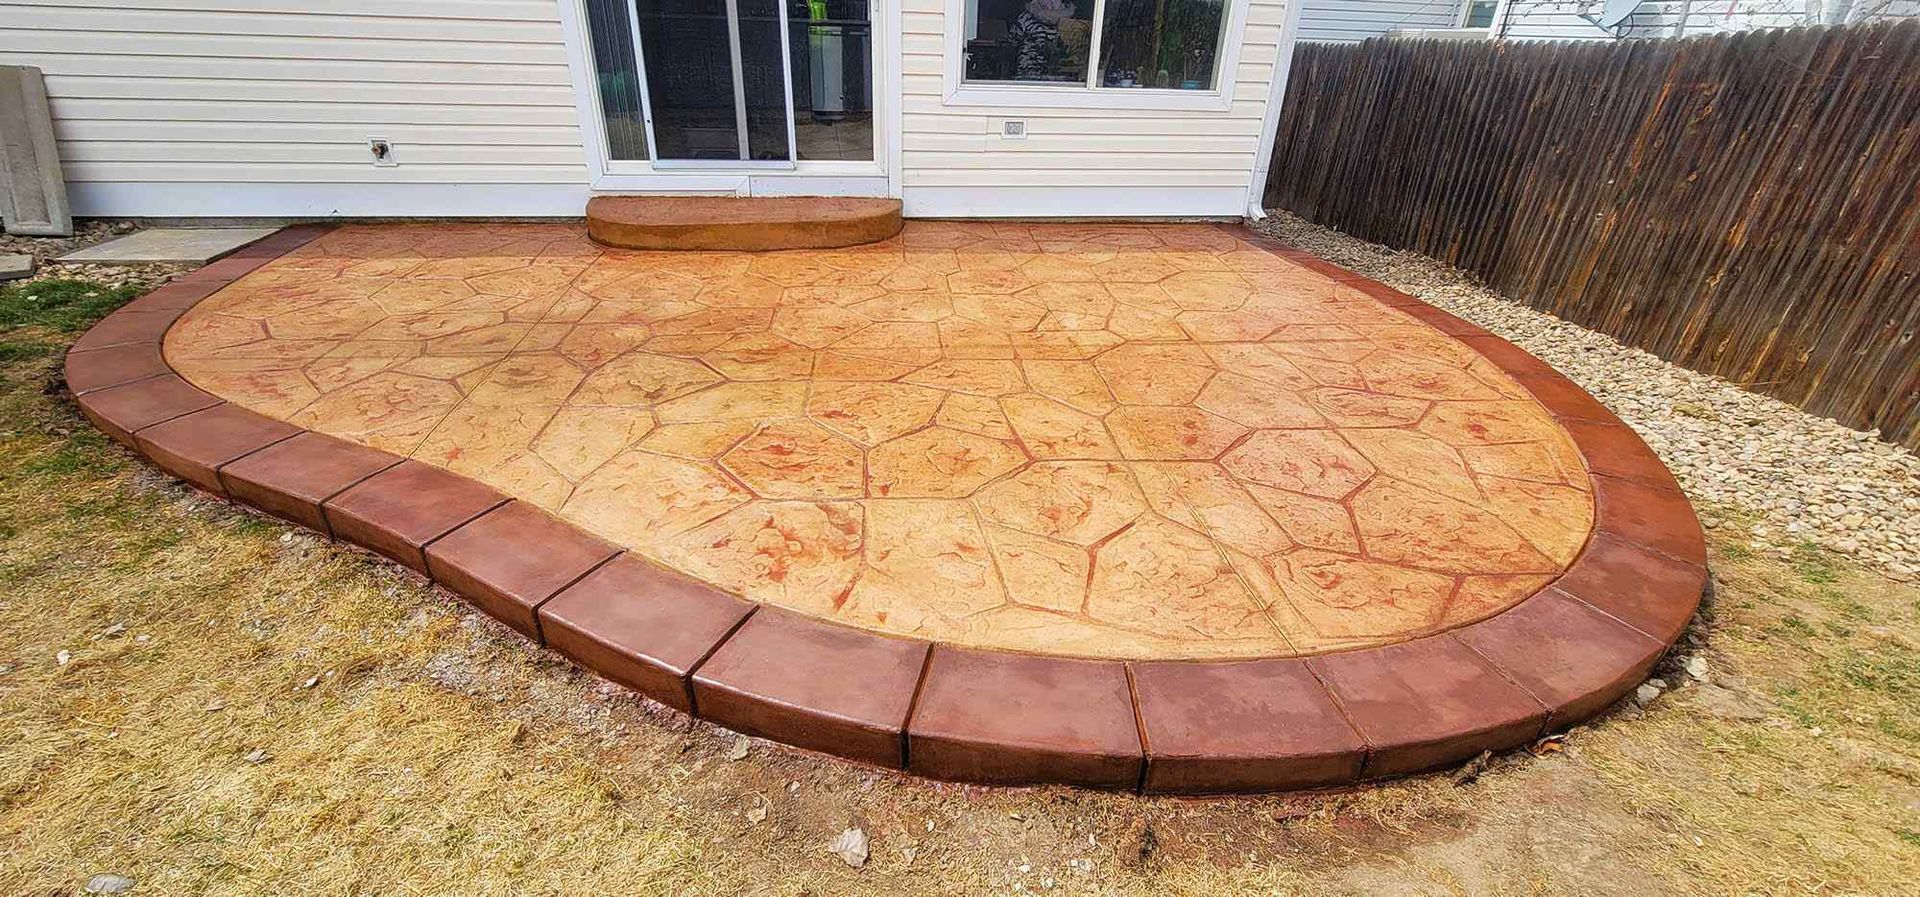 Stamped Concrete Patio Dark Red And Tan Colors